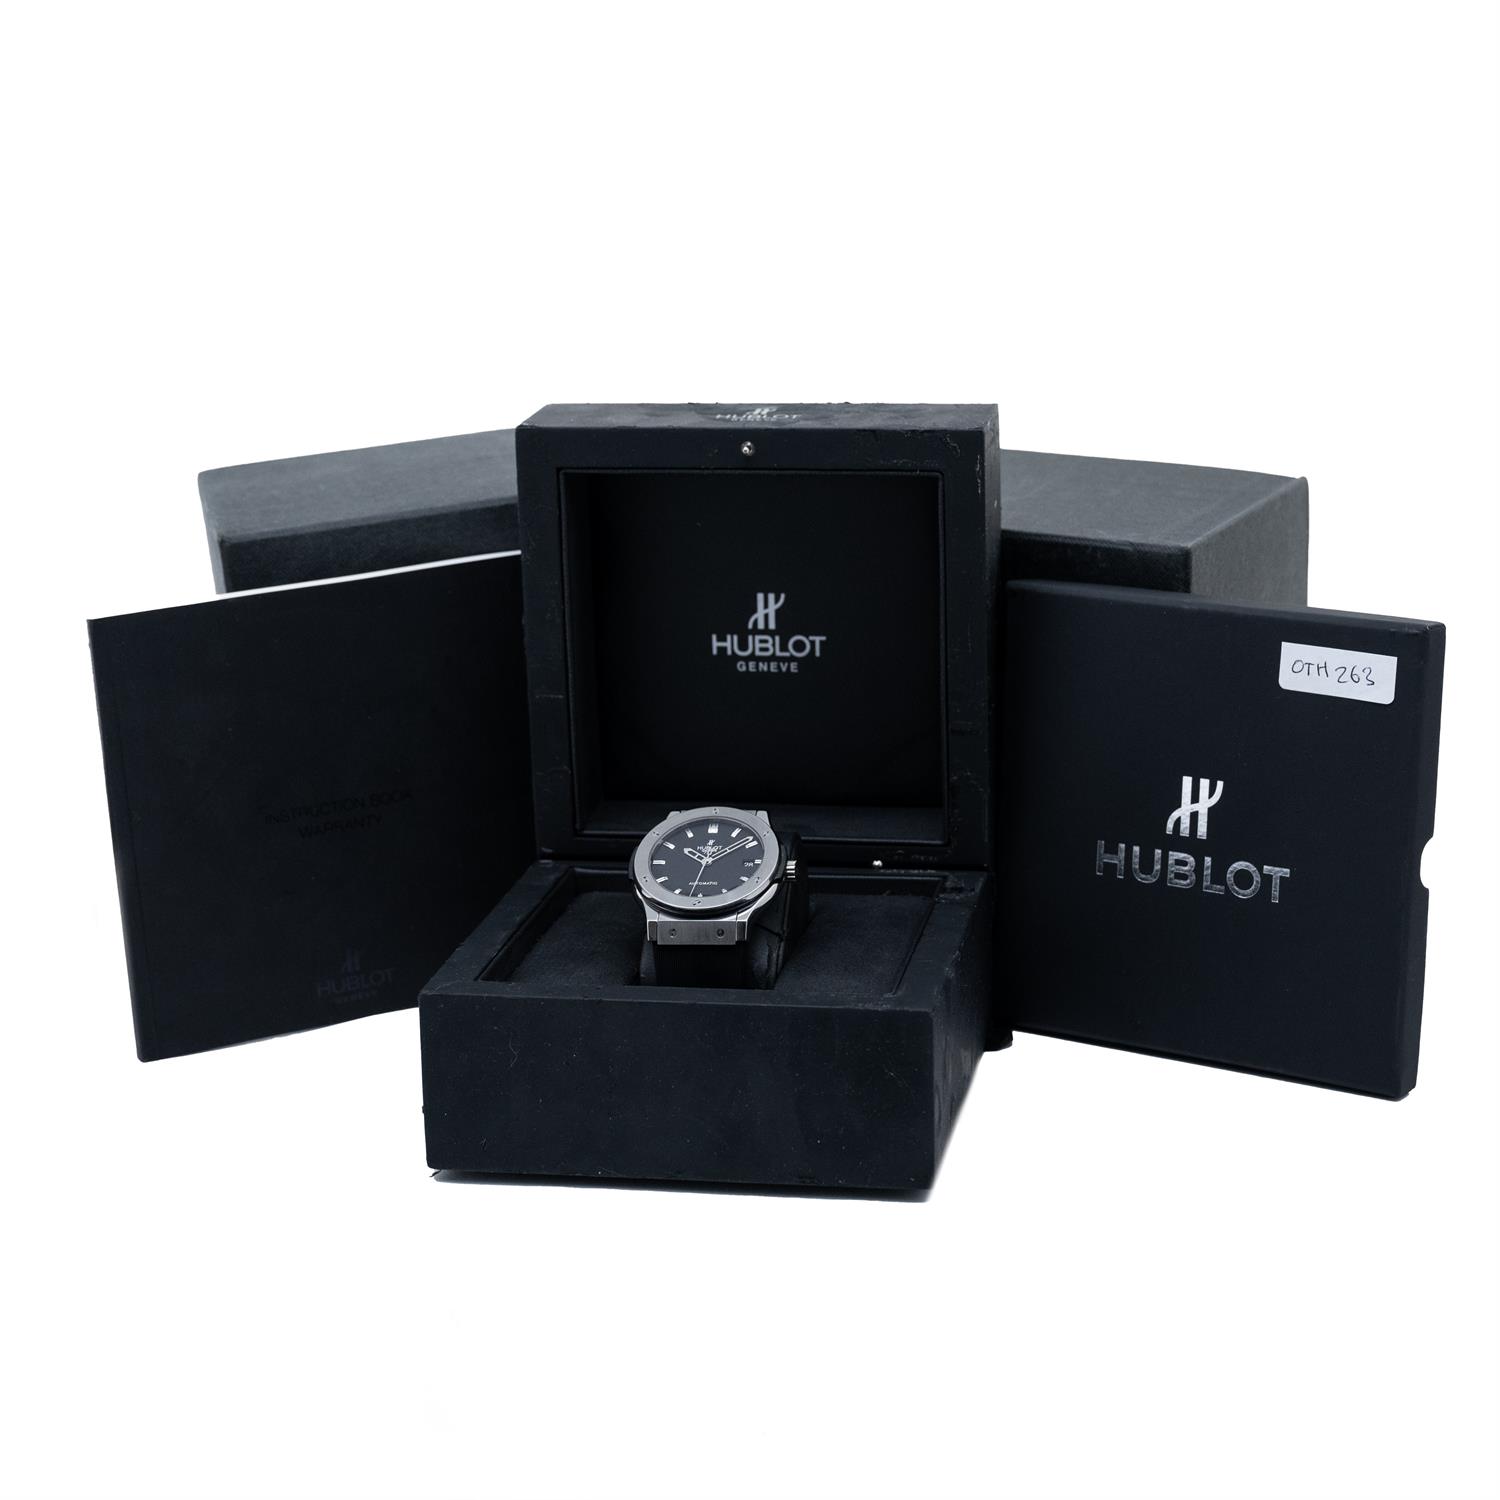 Hublot Fusion Automatic Offered with Box and Paperwork - Image 2 of 6